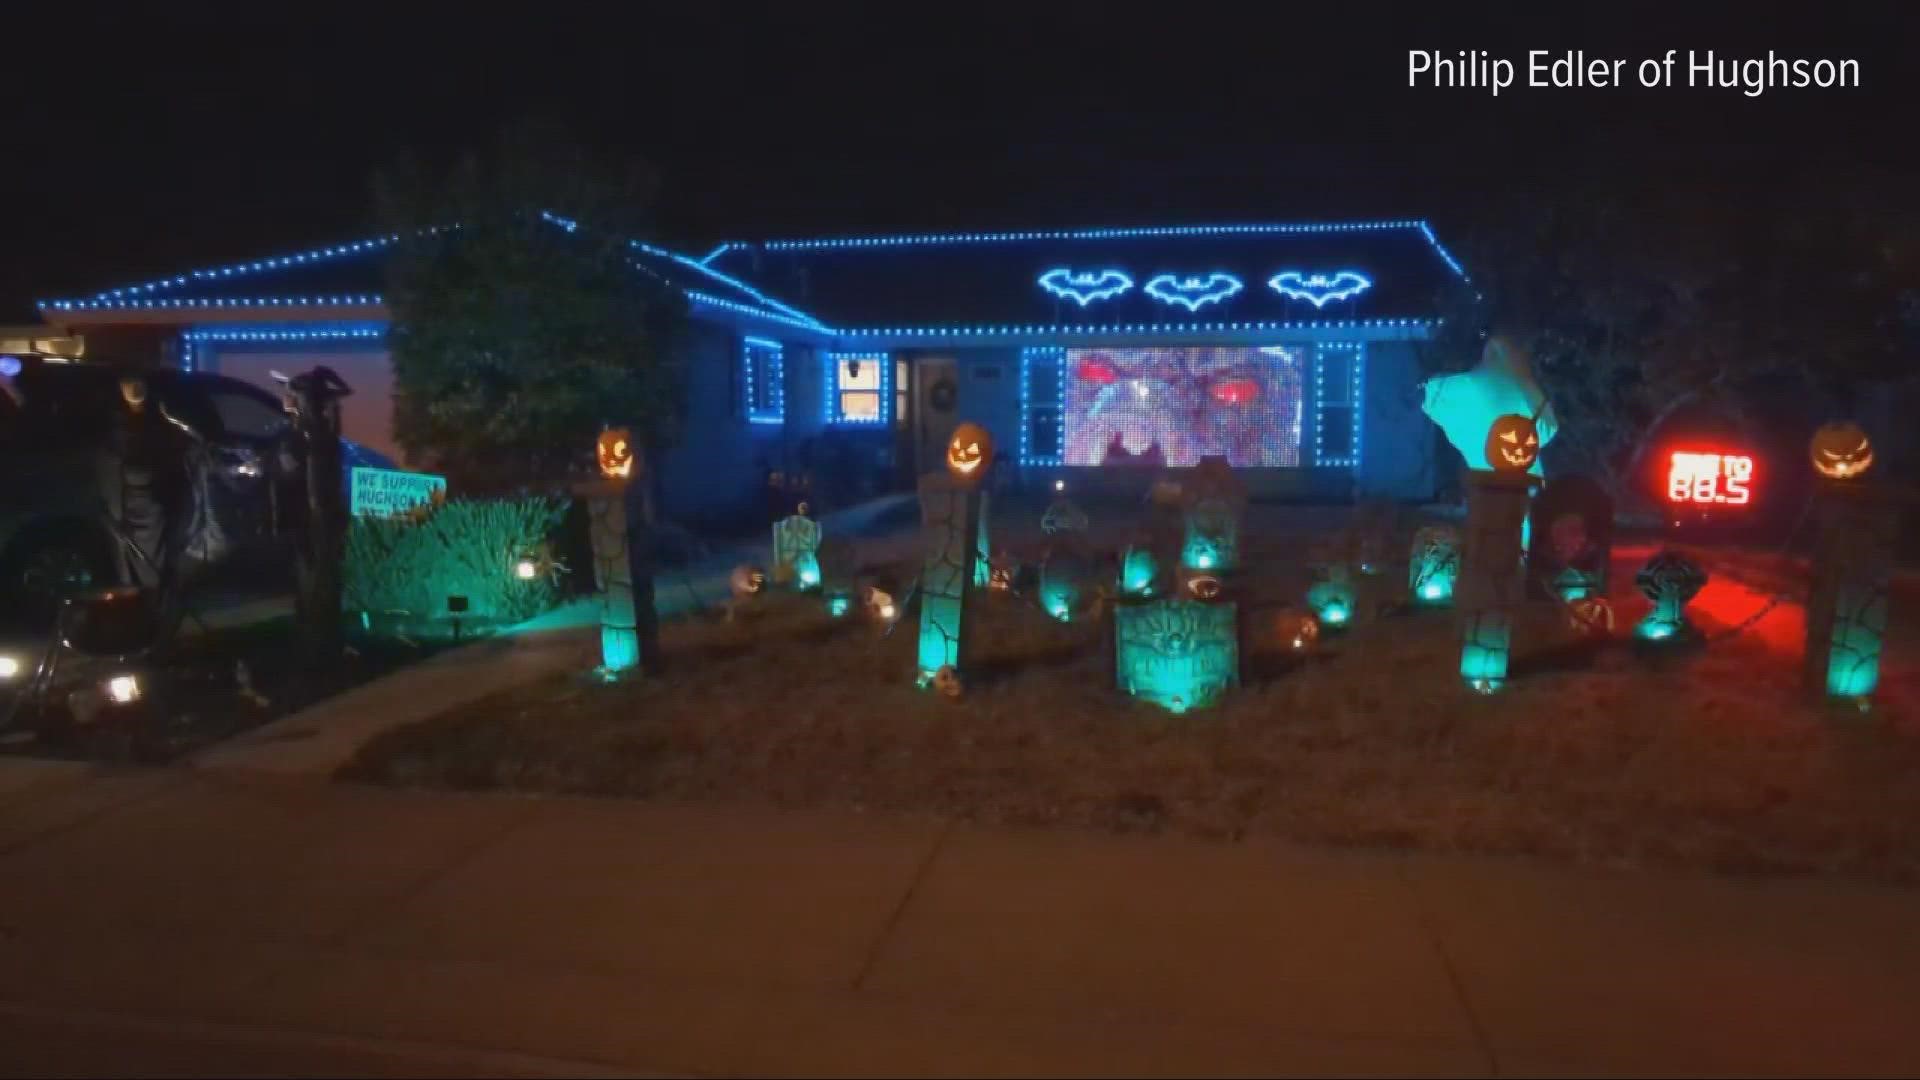 3,000 lights adorn a home in Hughson where the owner went all out for the holiday. Phillip Edler even the bats at the home himself.